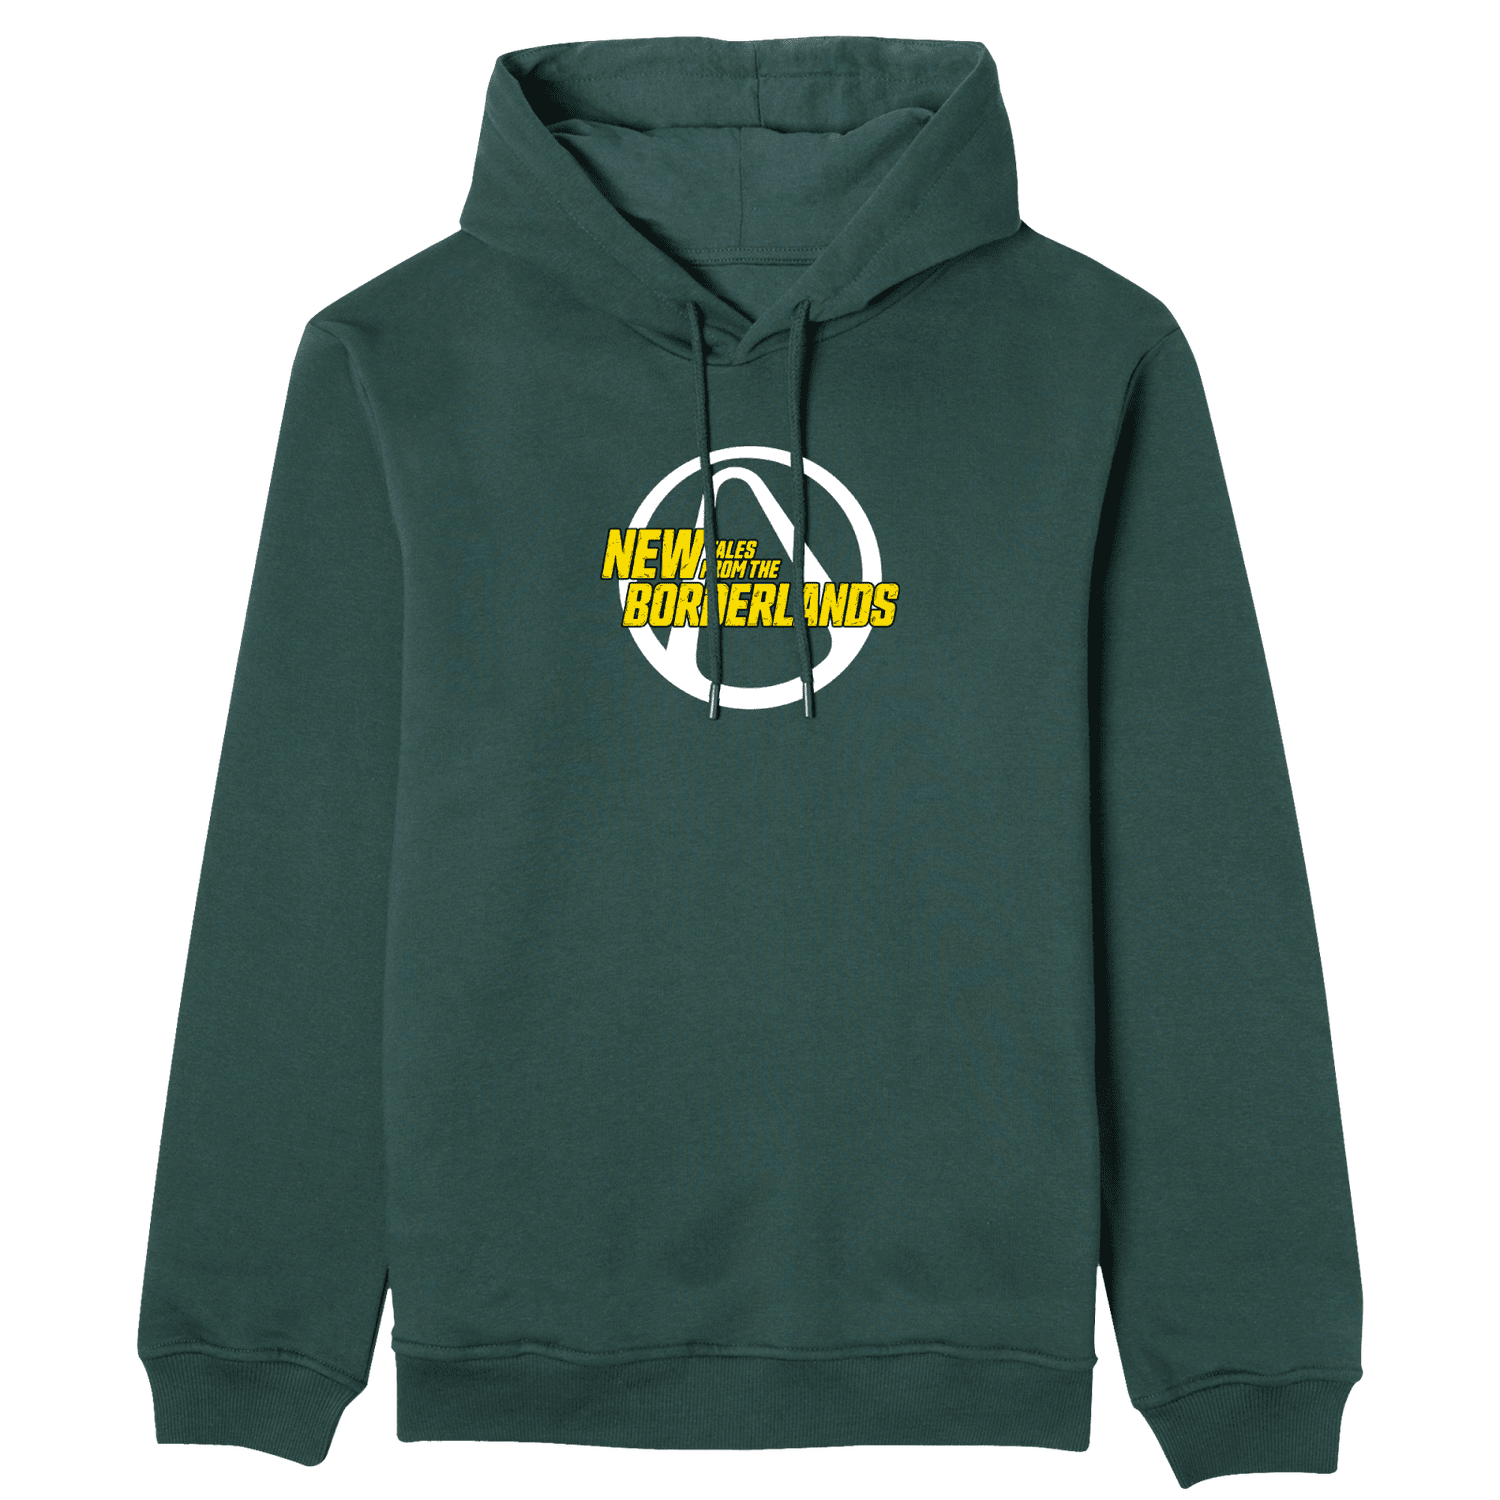 New Tales from the Borderlands Your Business Hoodie - Green